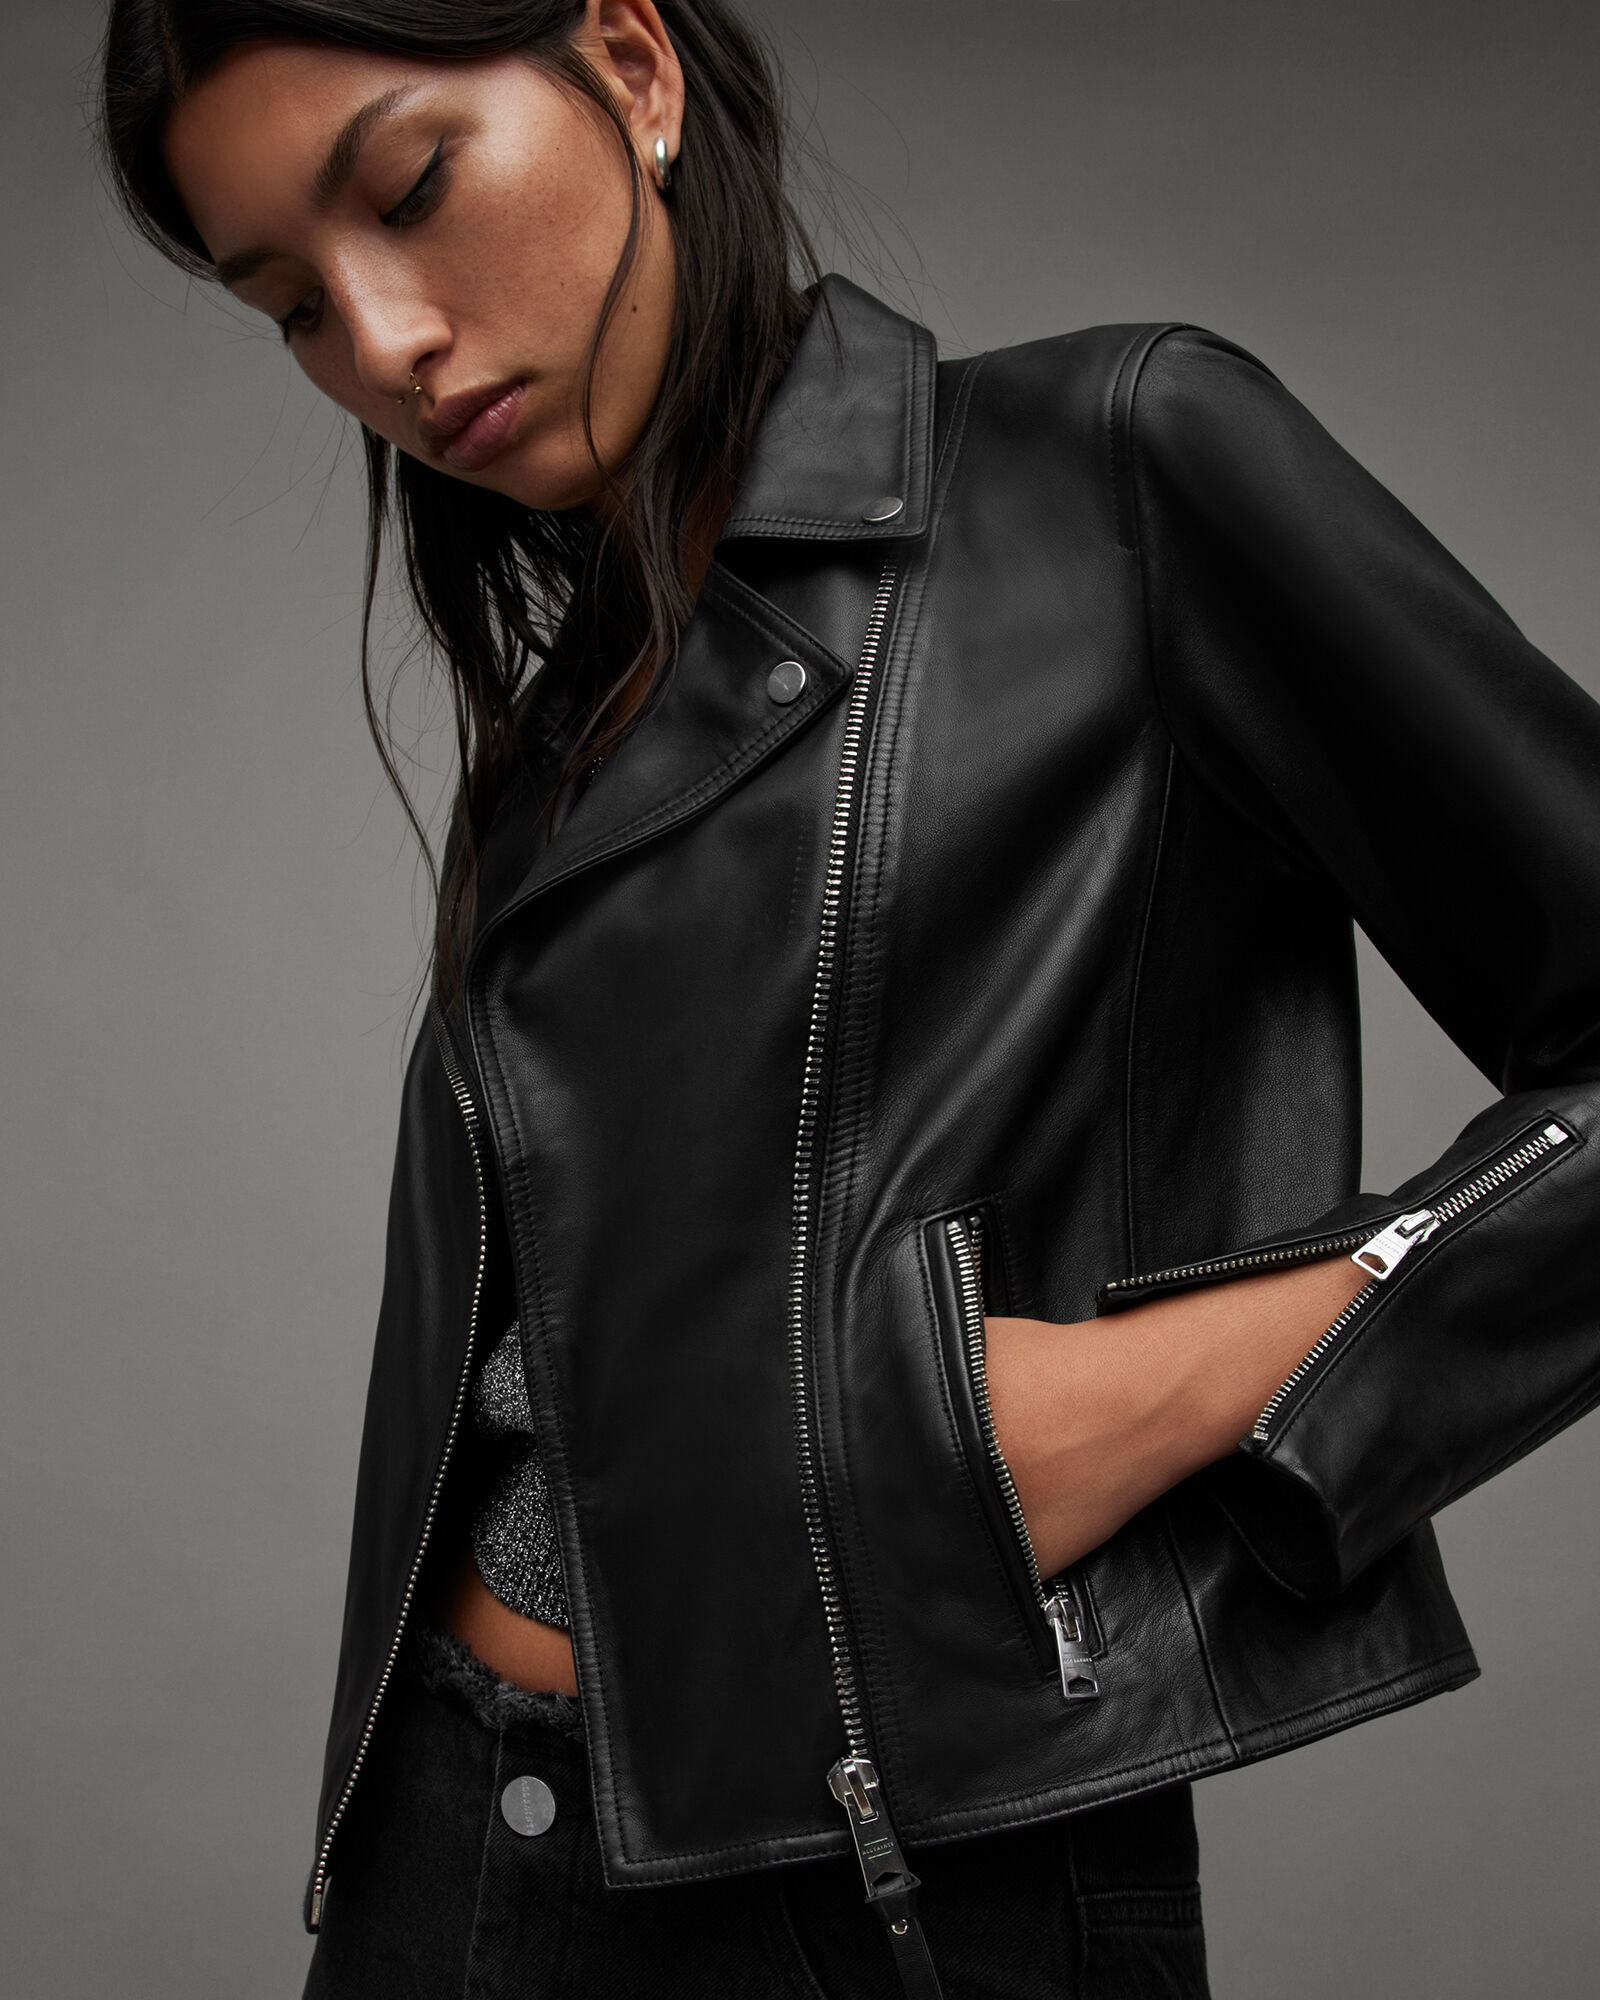 Luxe-Leather Cognac Jacket for Women Premium Quality Leather Jacket